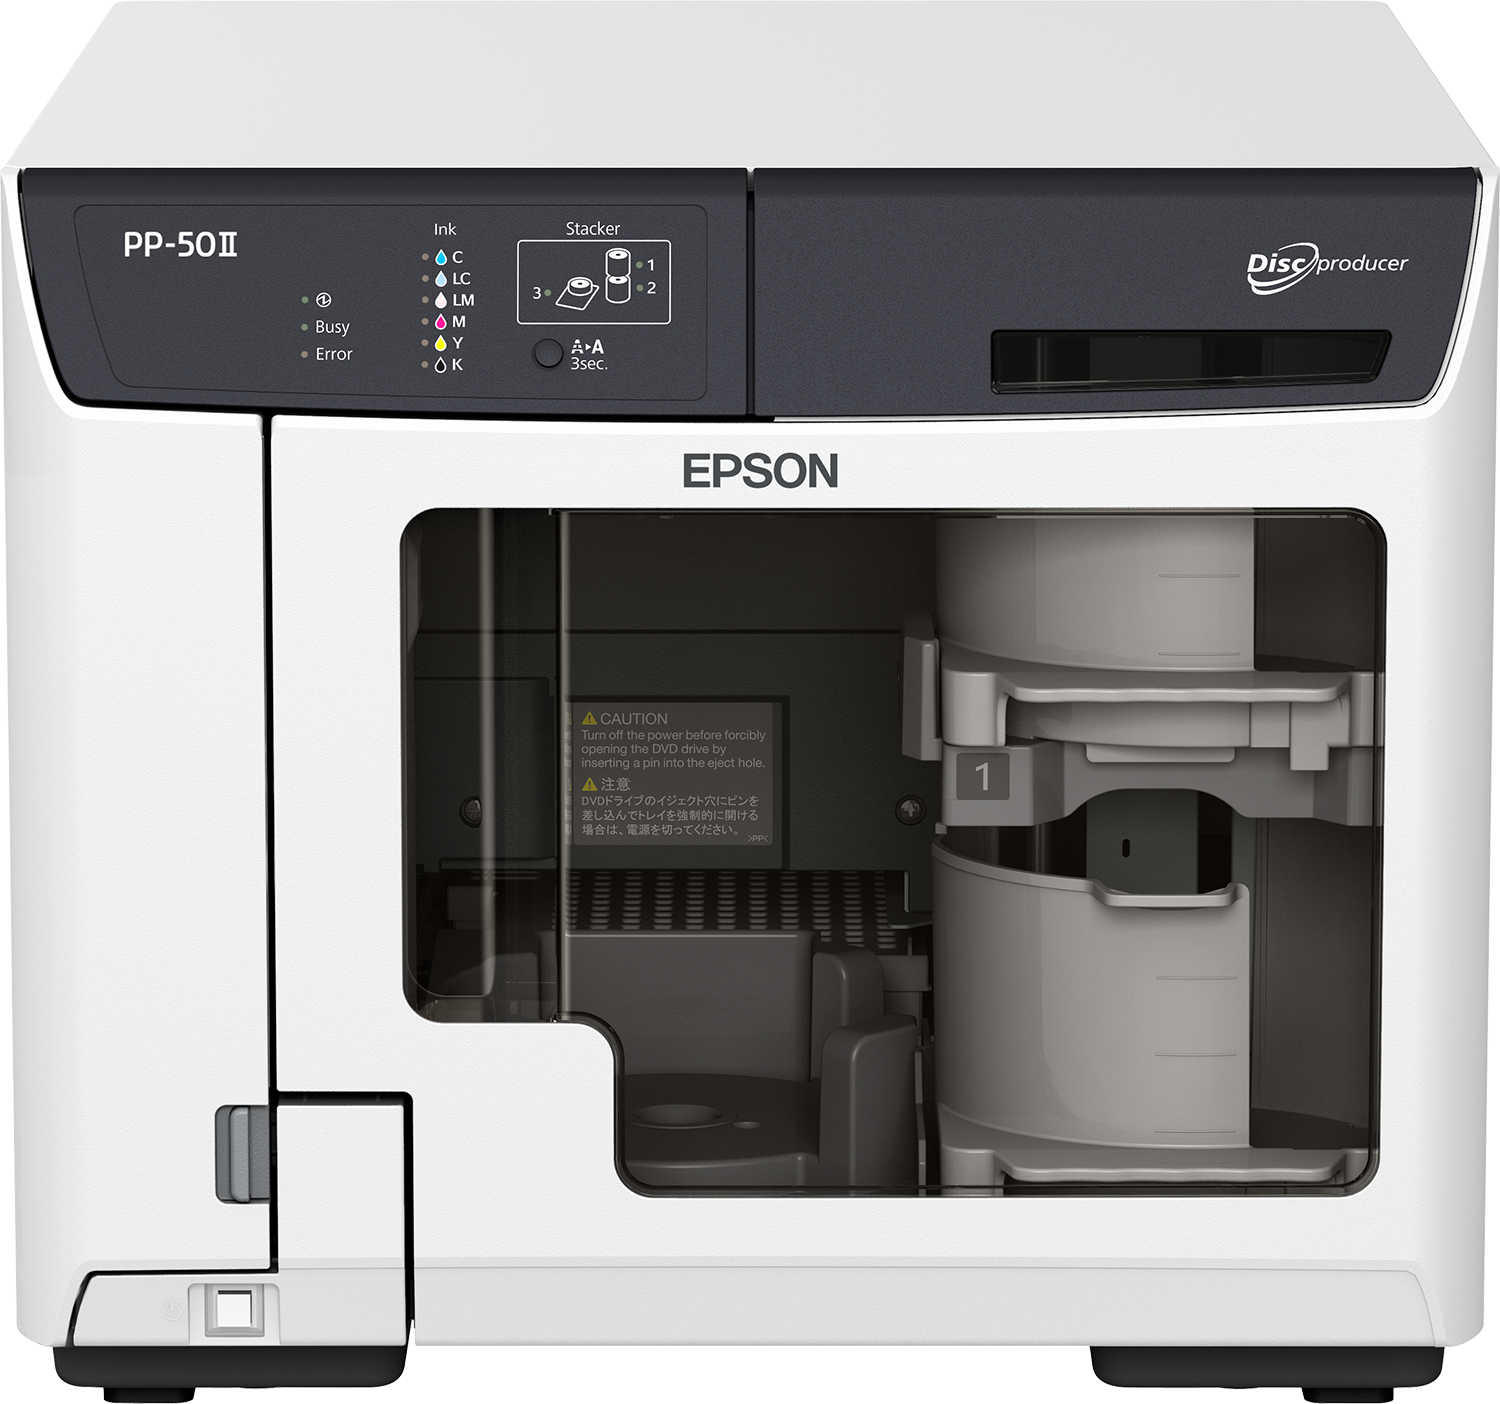 Epson Discproducer PP-50II Product Image